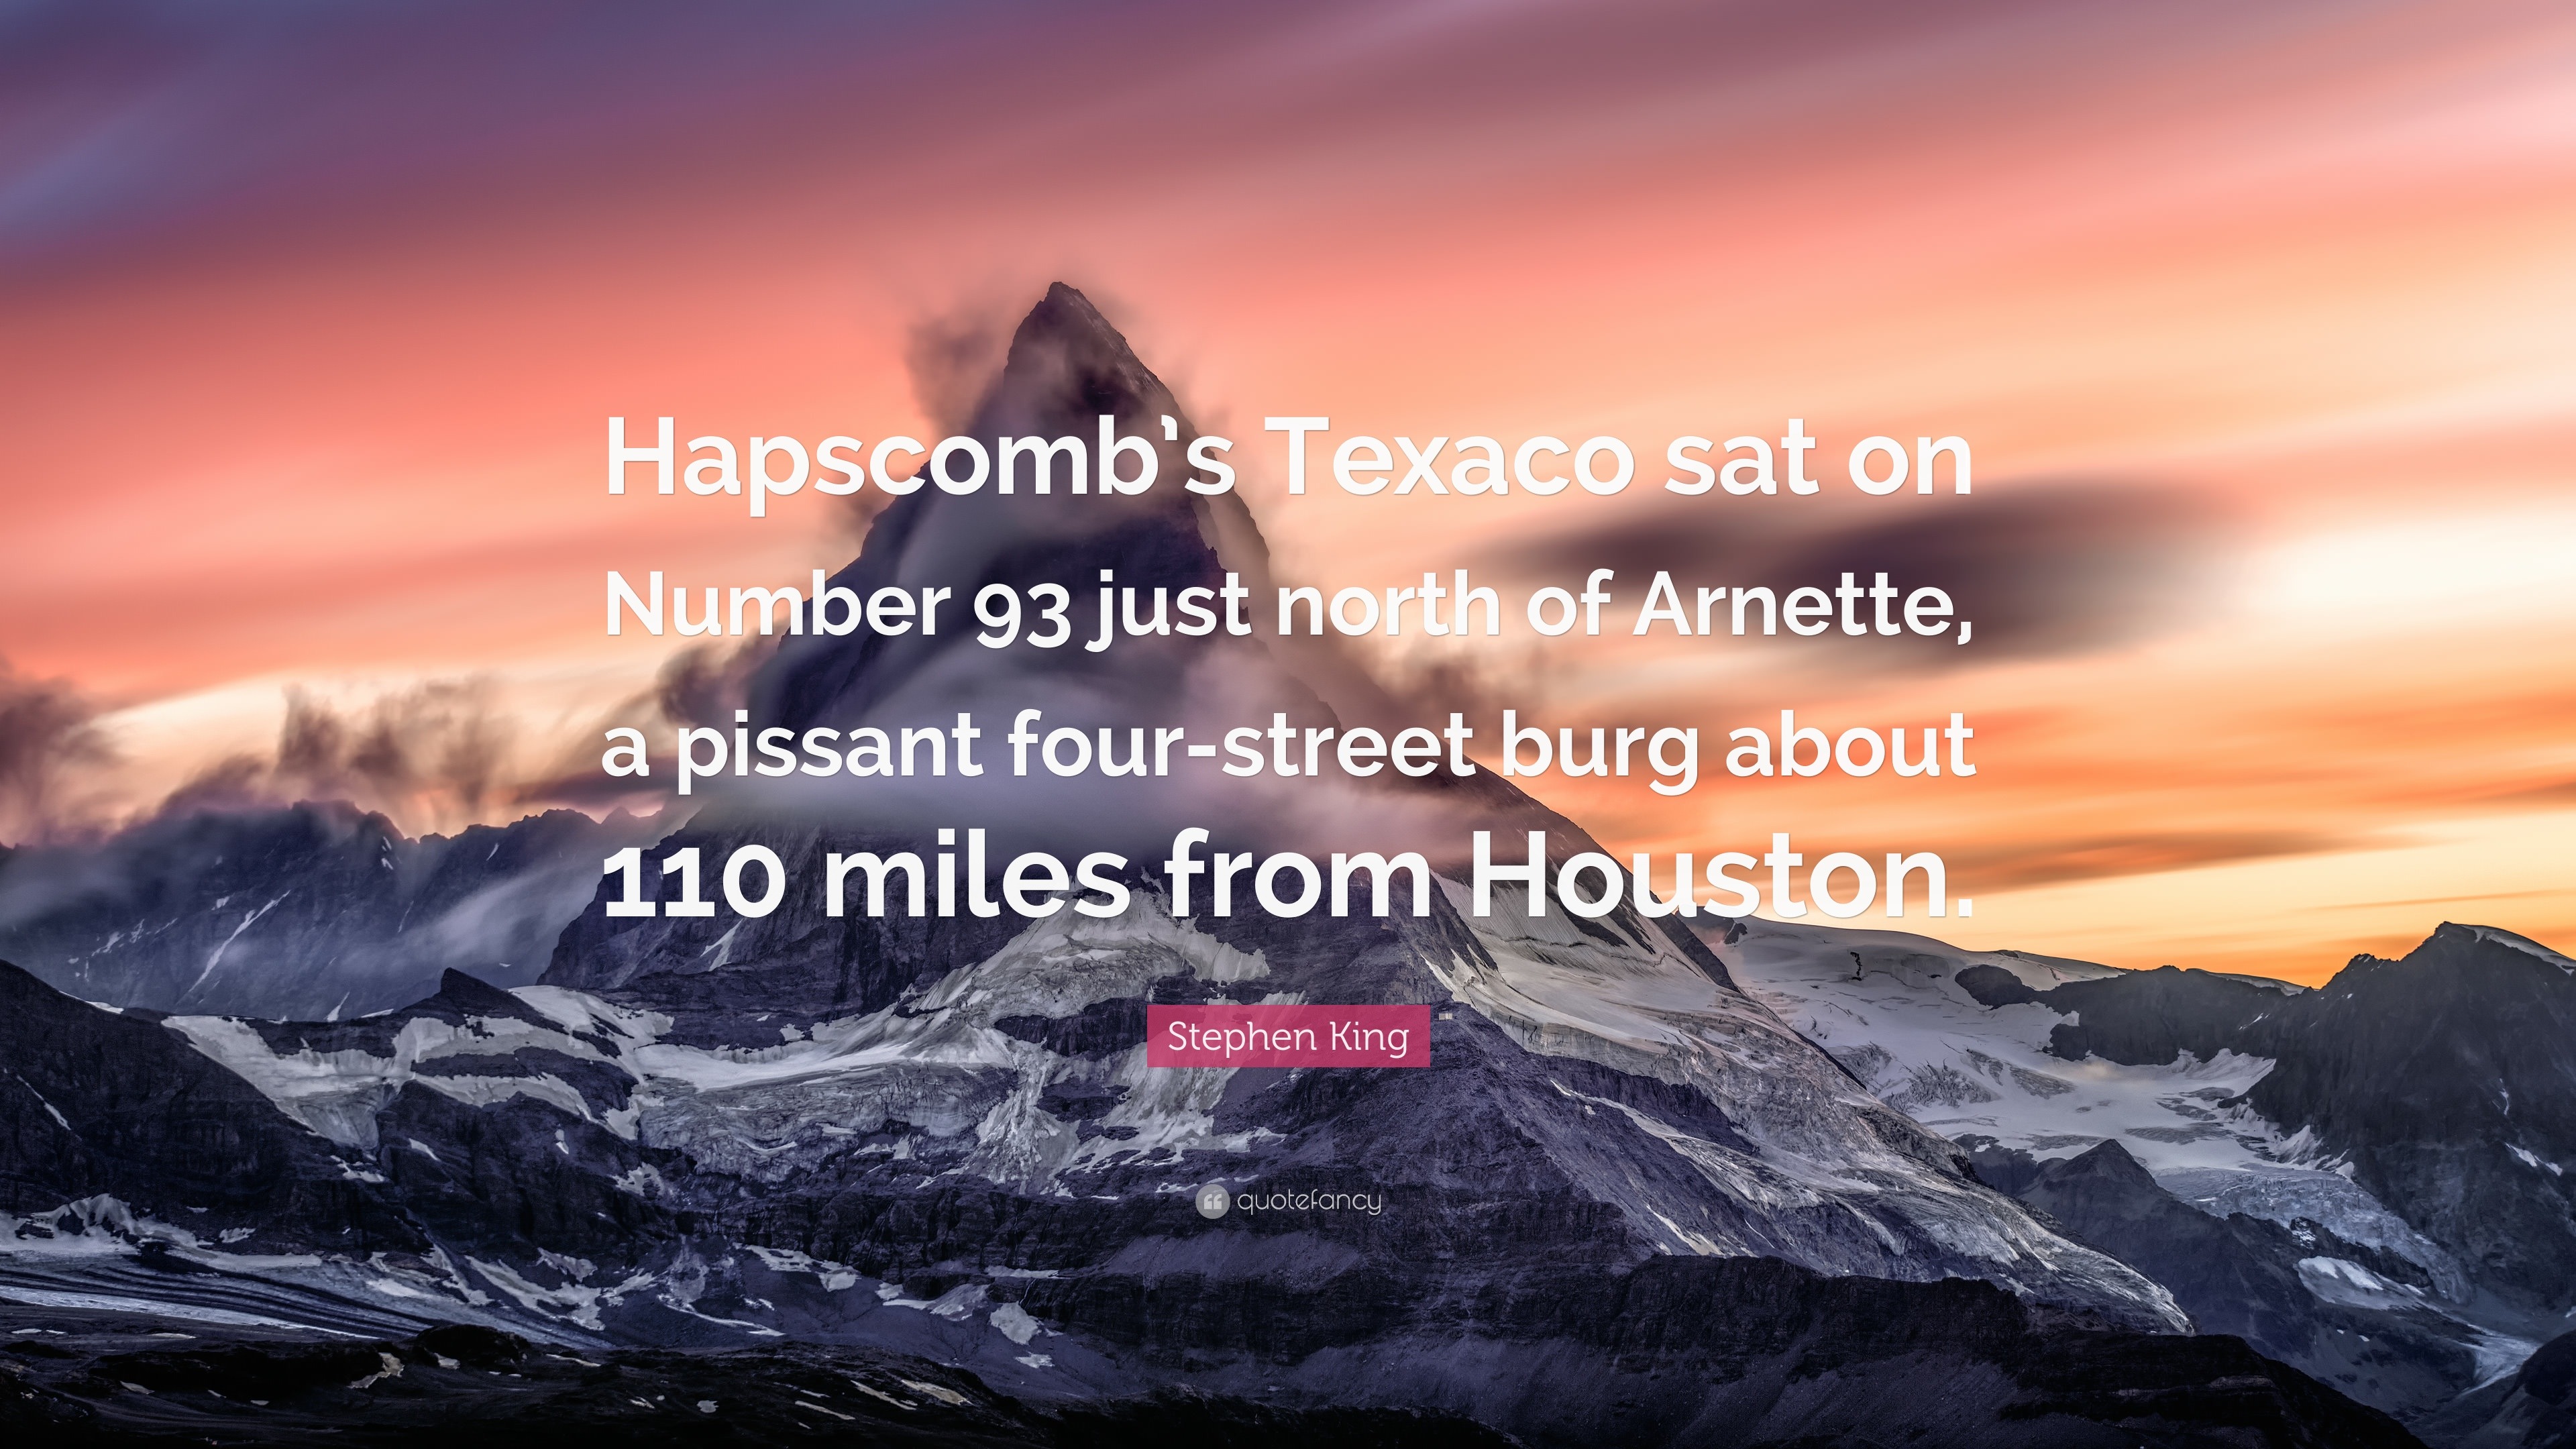 Stephen King Quote Hapscomb S Texaco Sat On Number 93 Just North Of Arnette A Pissant Four